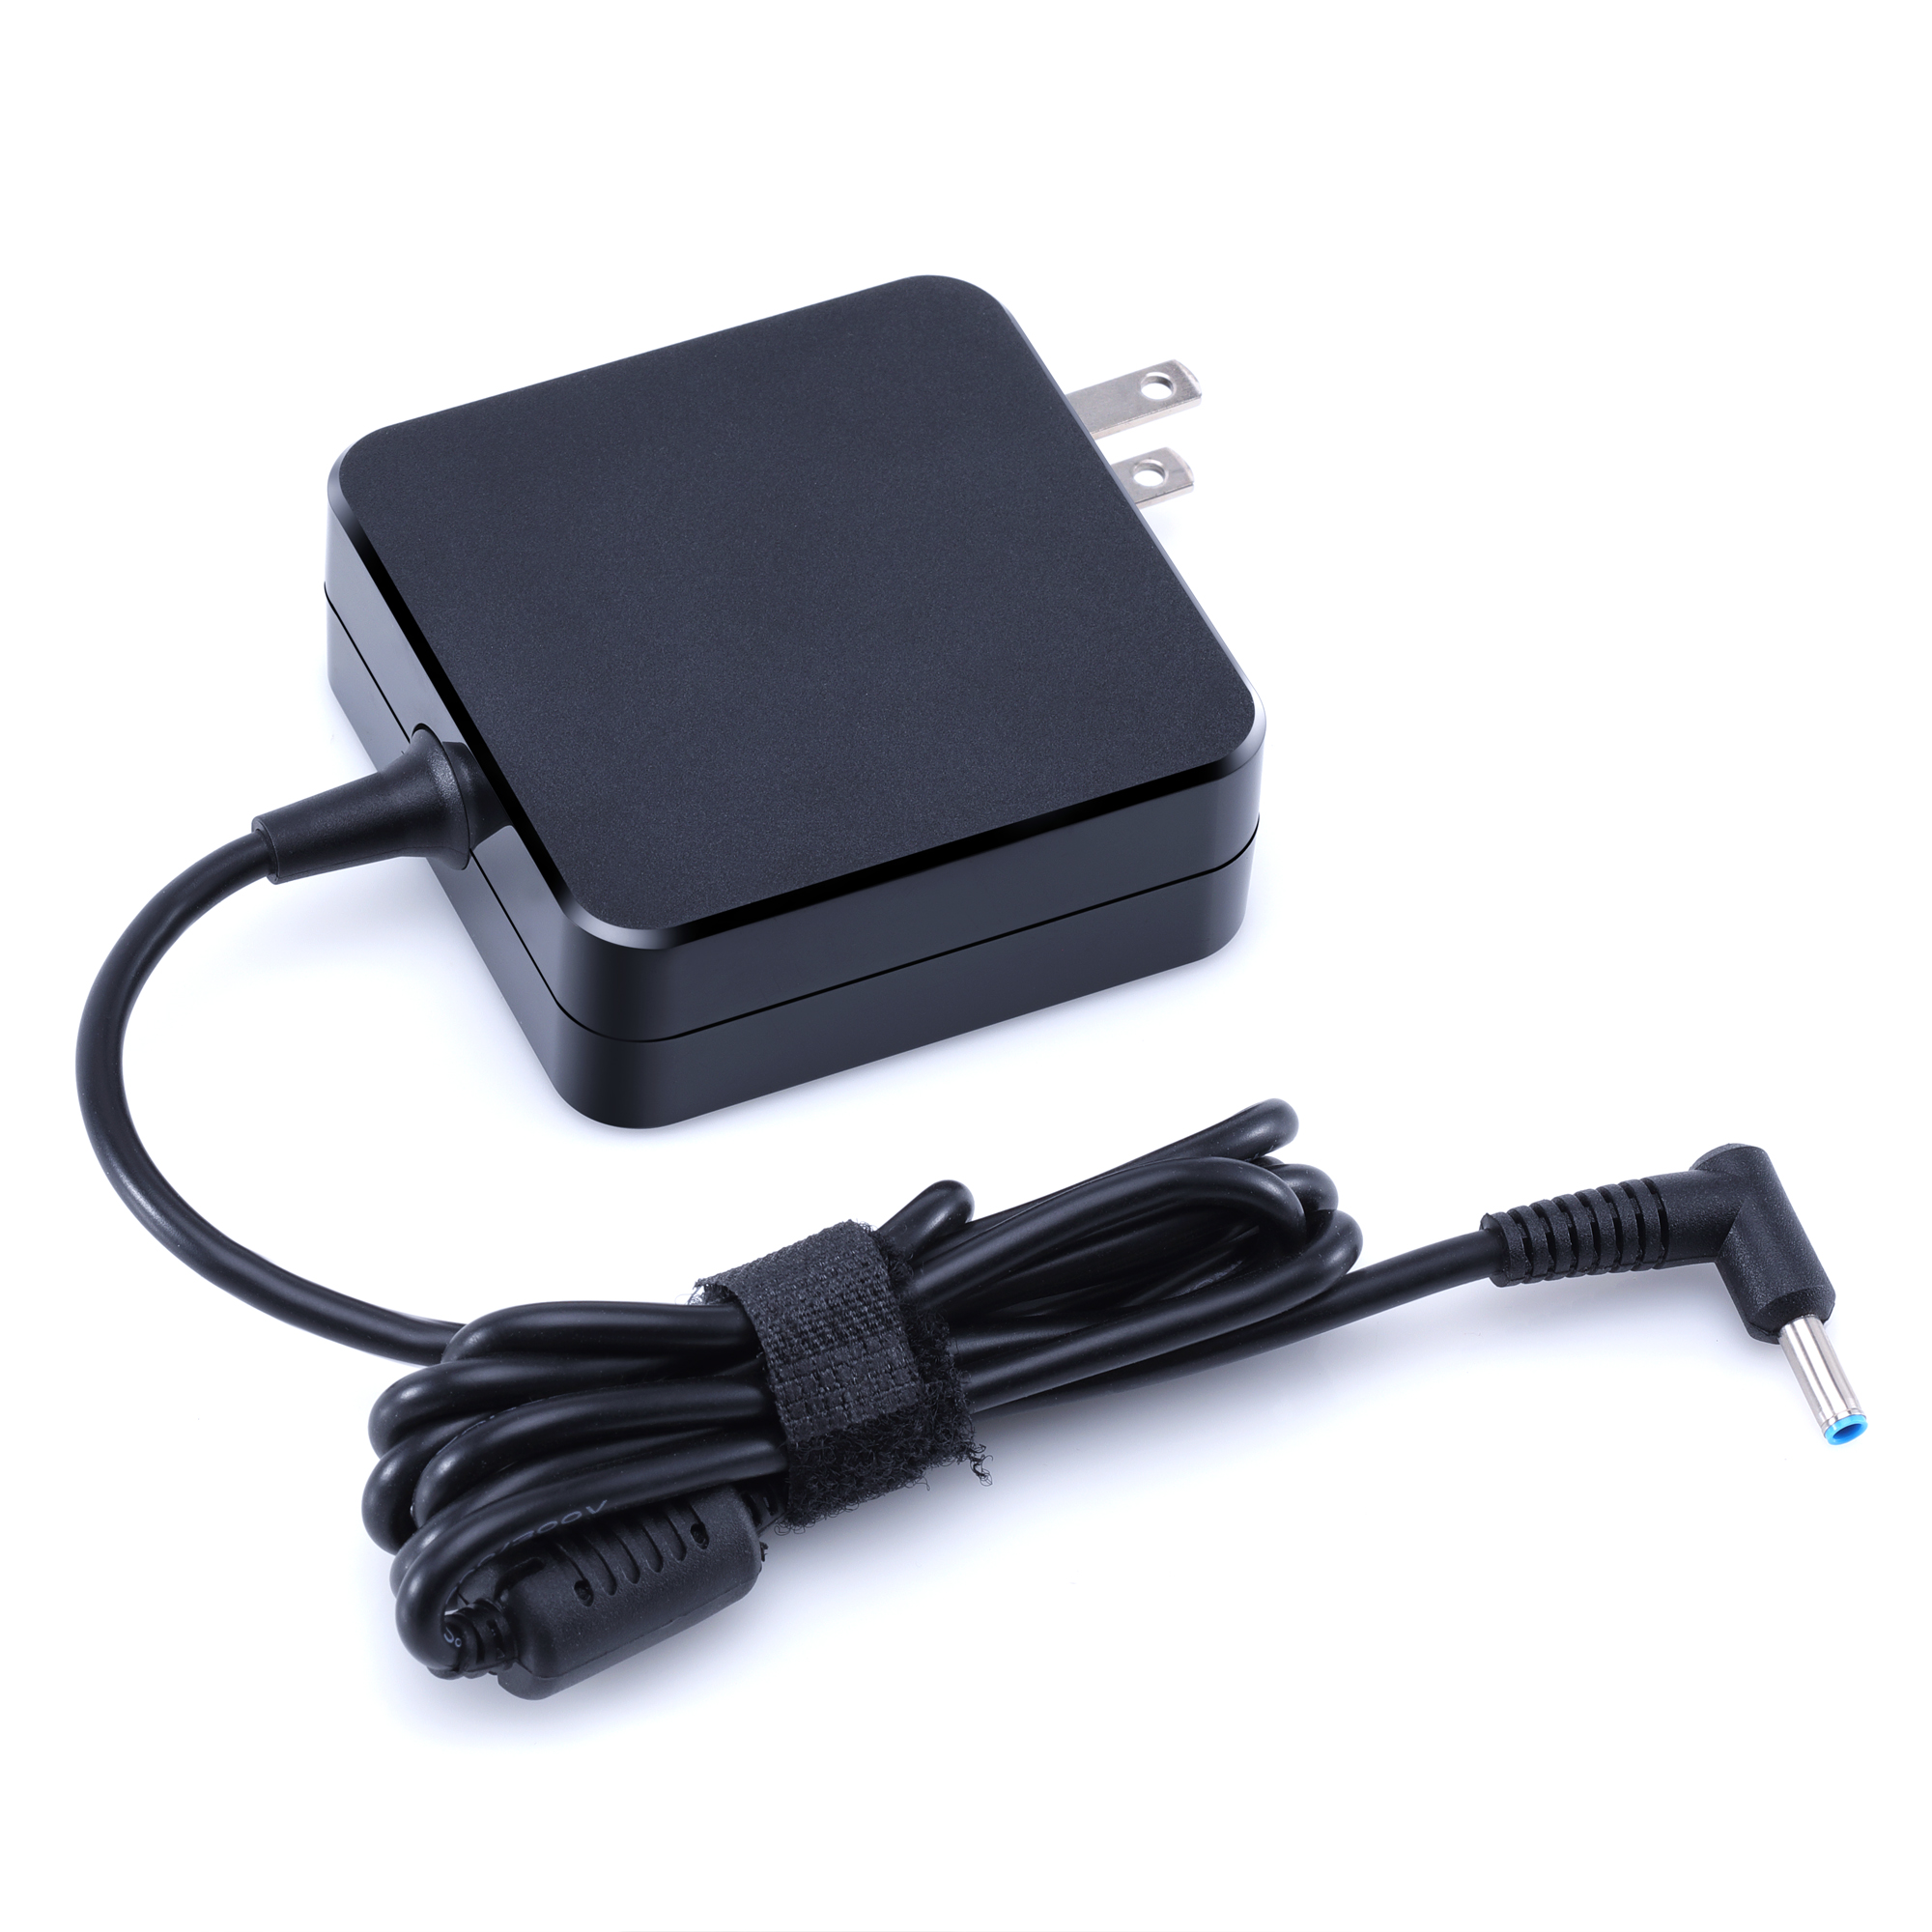 Fothwin-195V-333A-65W-Interface-45times30mm-Laptop-AC-Power-Adapter-Notebook-Charger-For-HP-1454514-2